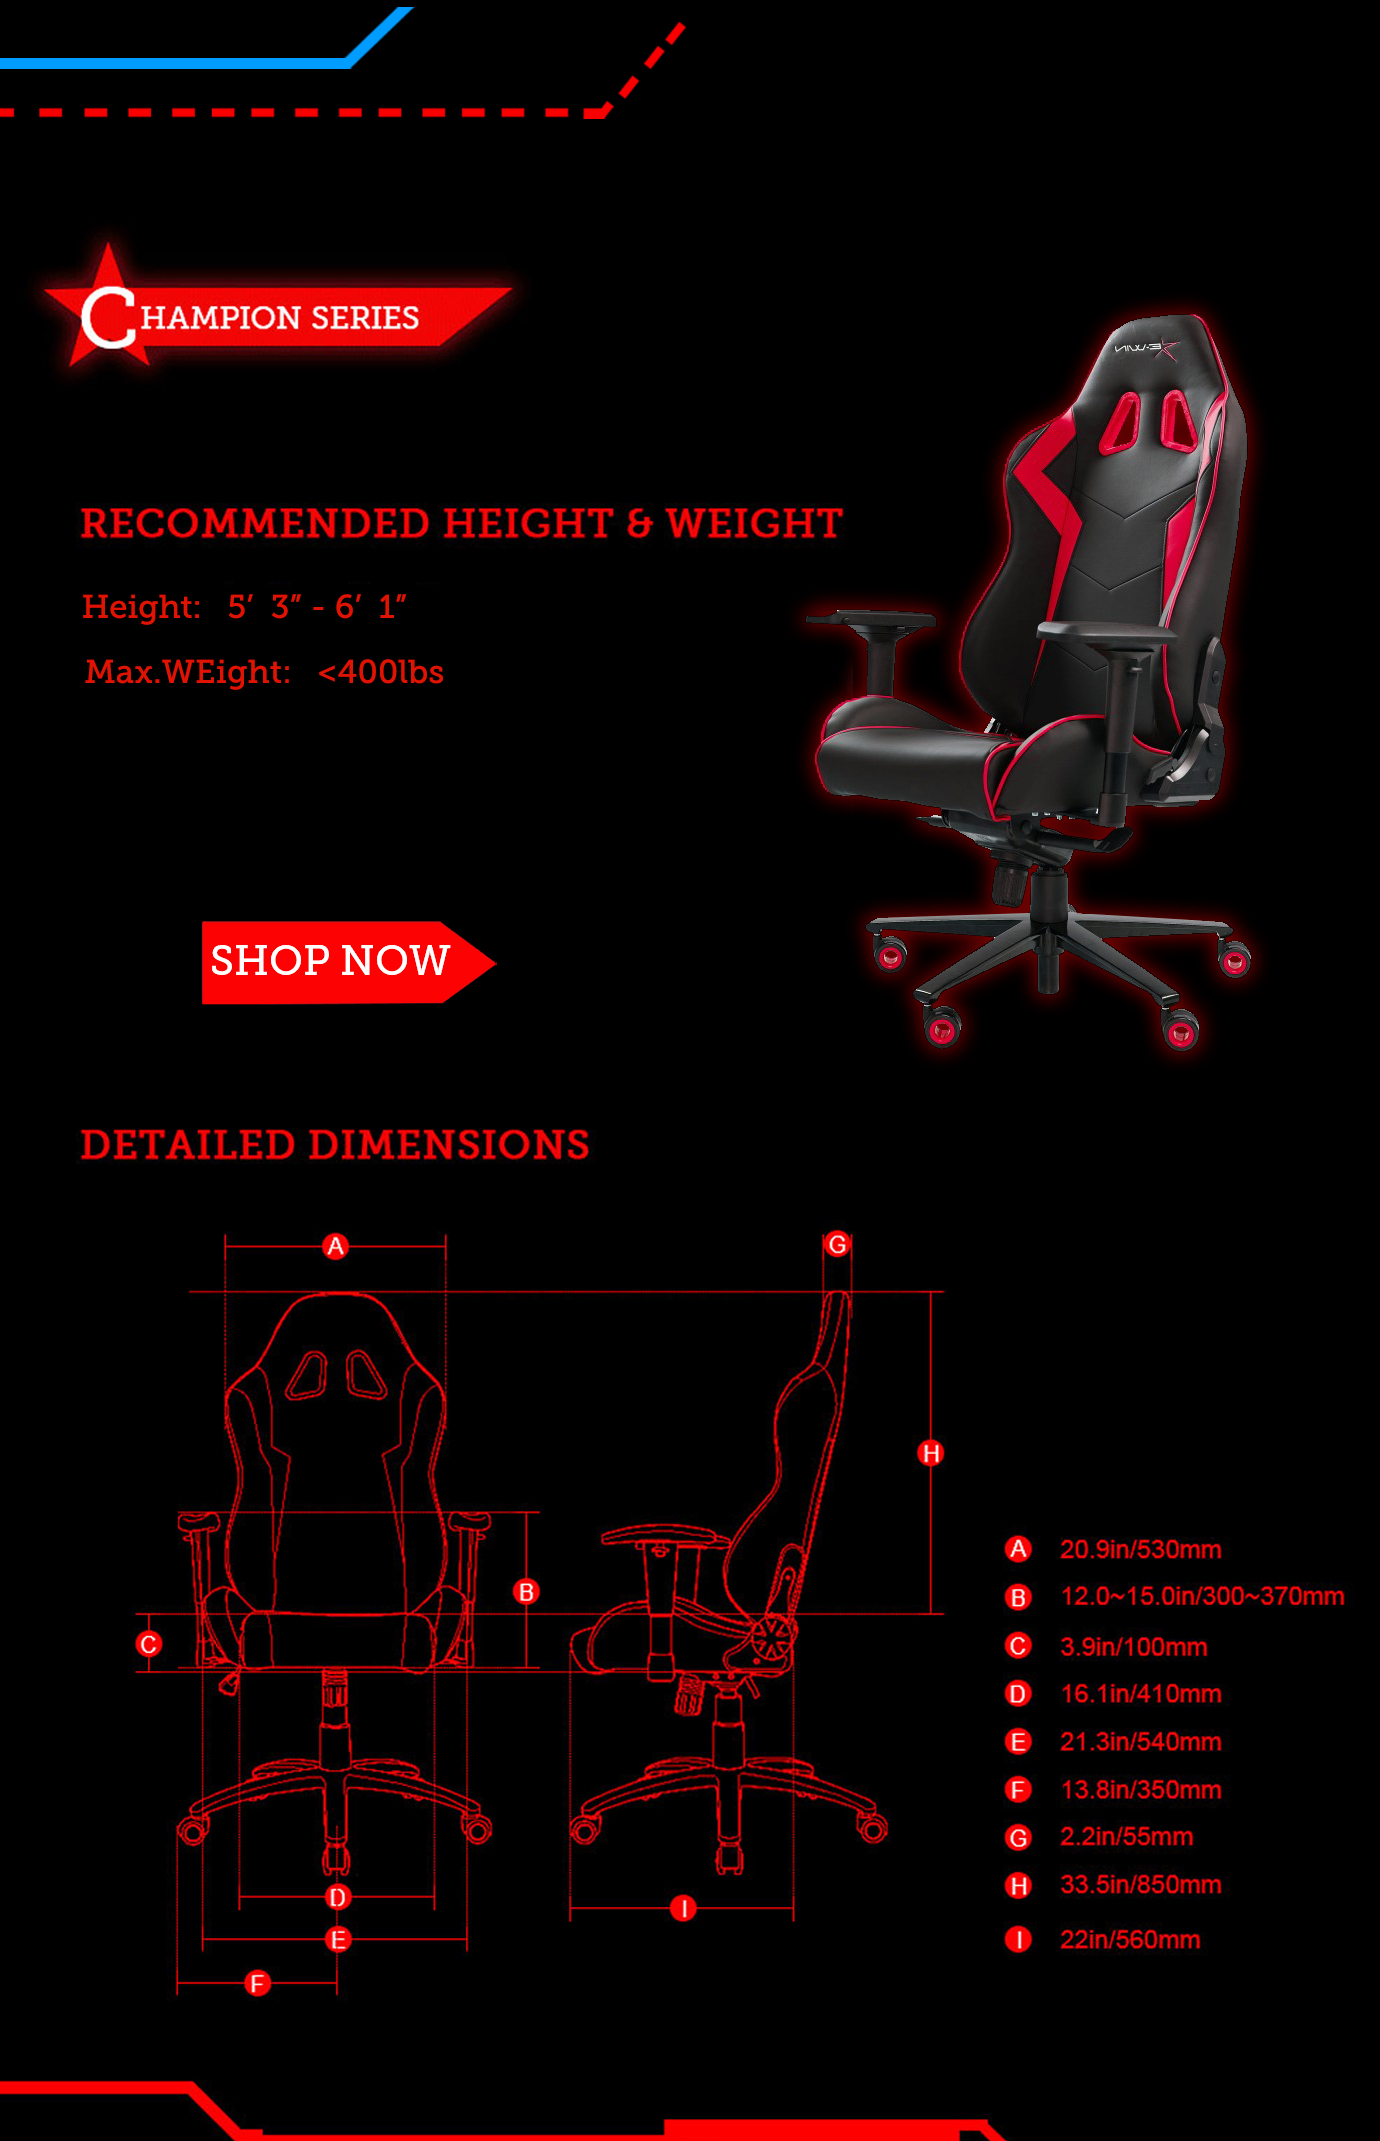 Dimensions of E-WIN Champion Series Gaming Chairs